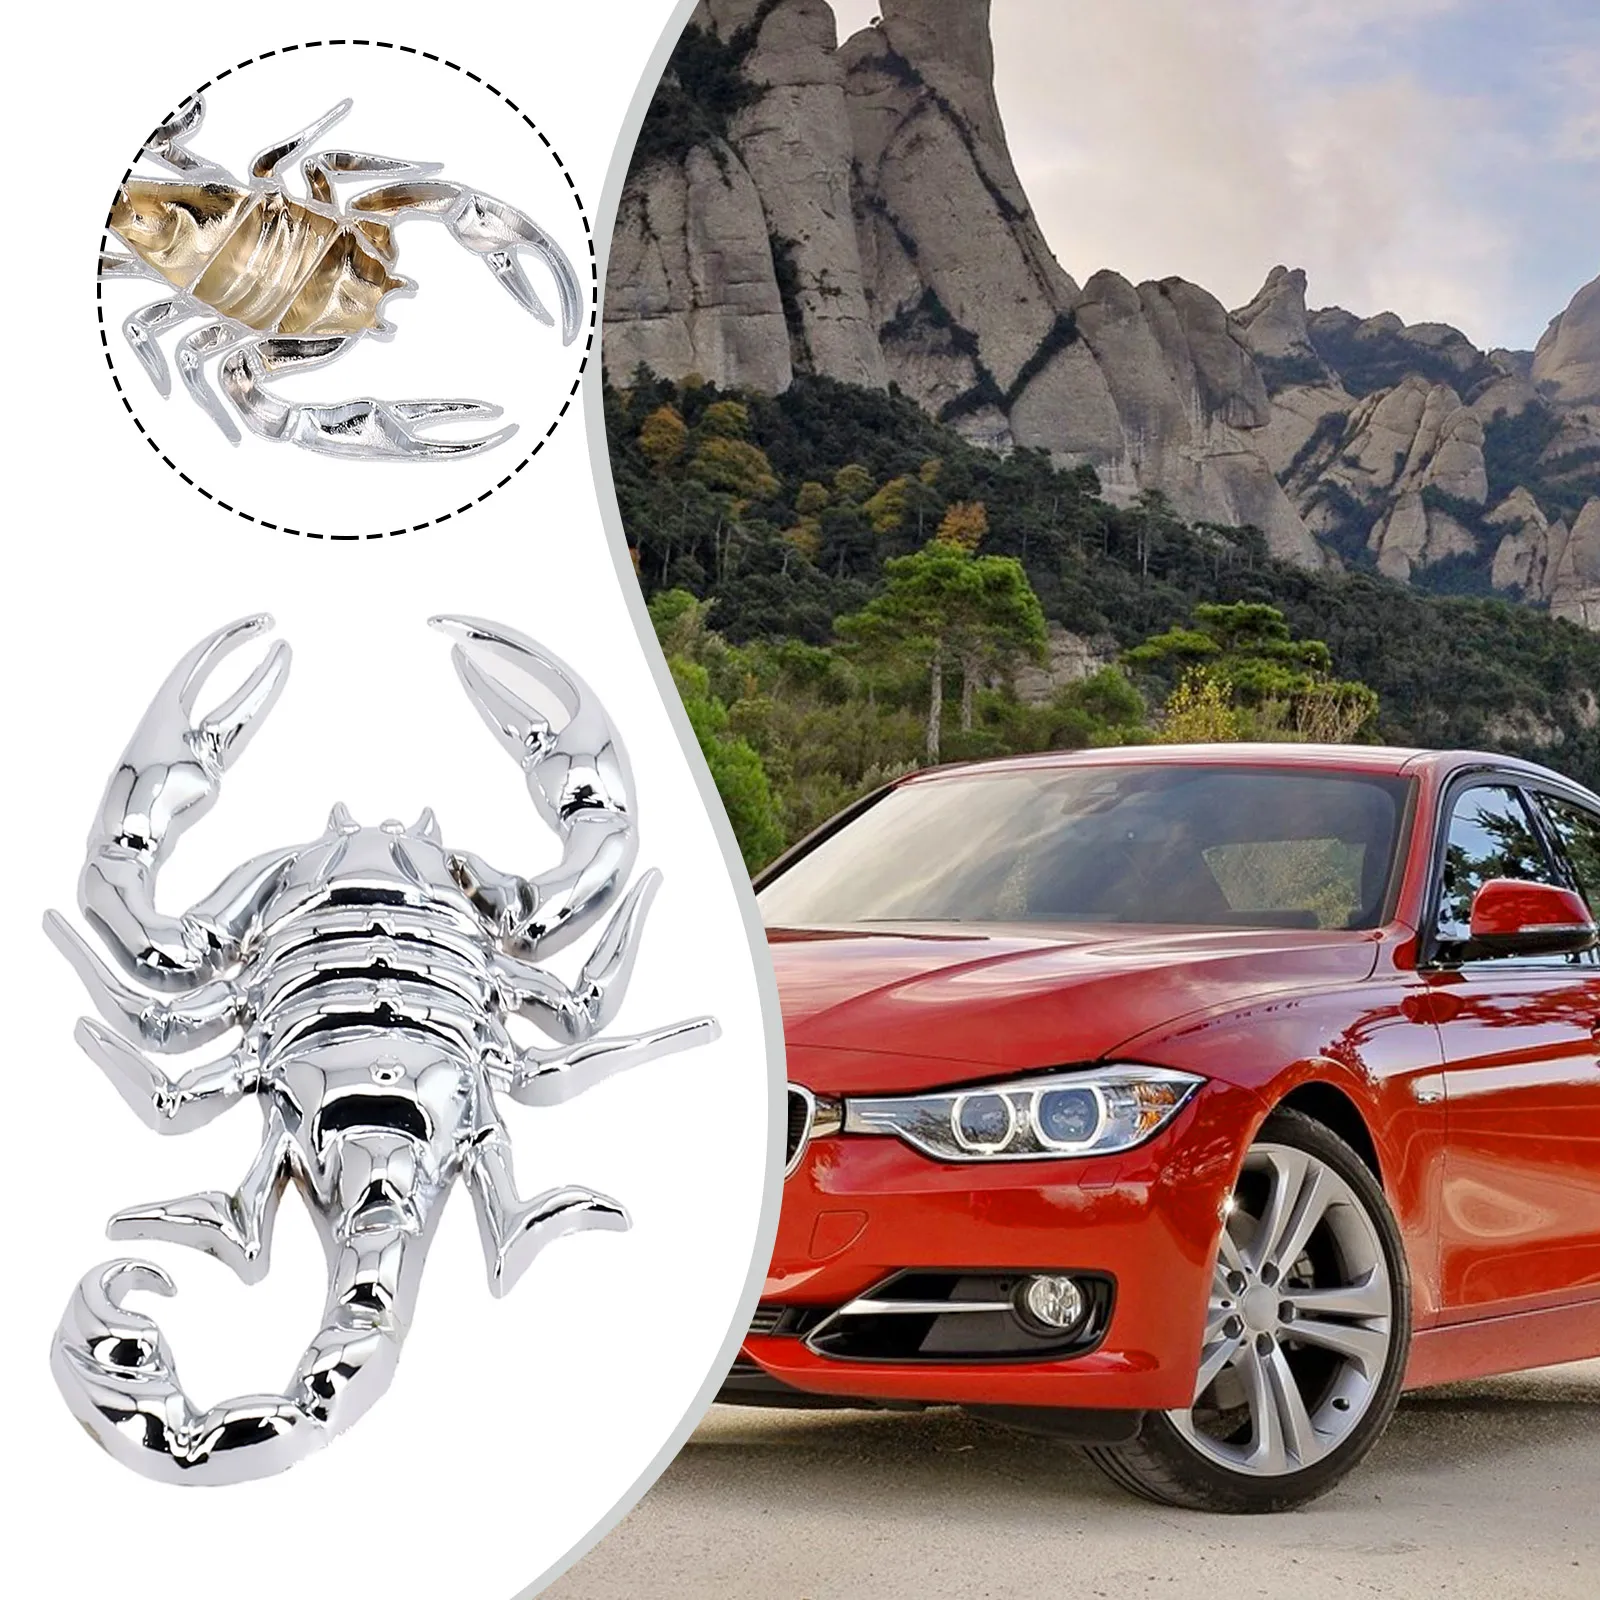 

3D Emblem stickers Trucks Body Cars Fashionable Accessories Set Metal Replacement Scorpion King Adhesive Badge